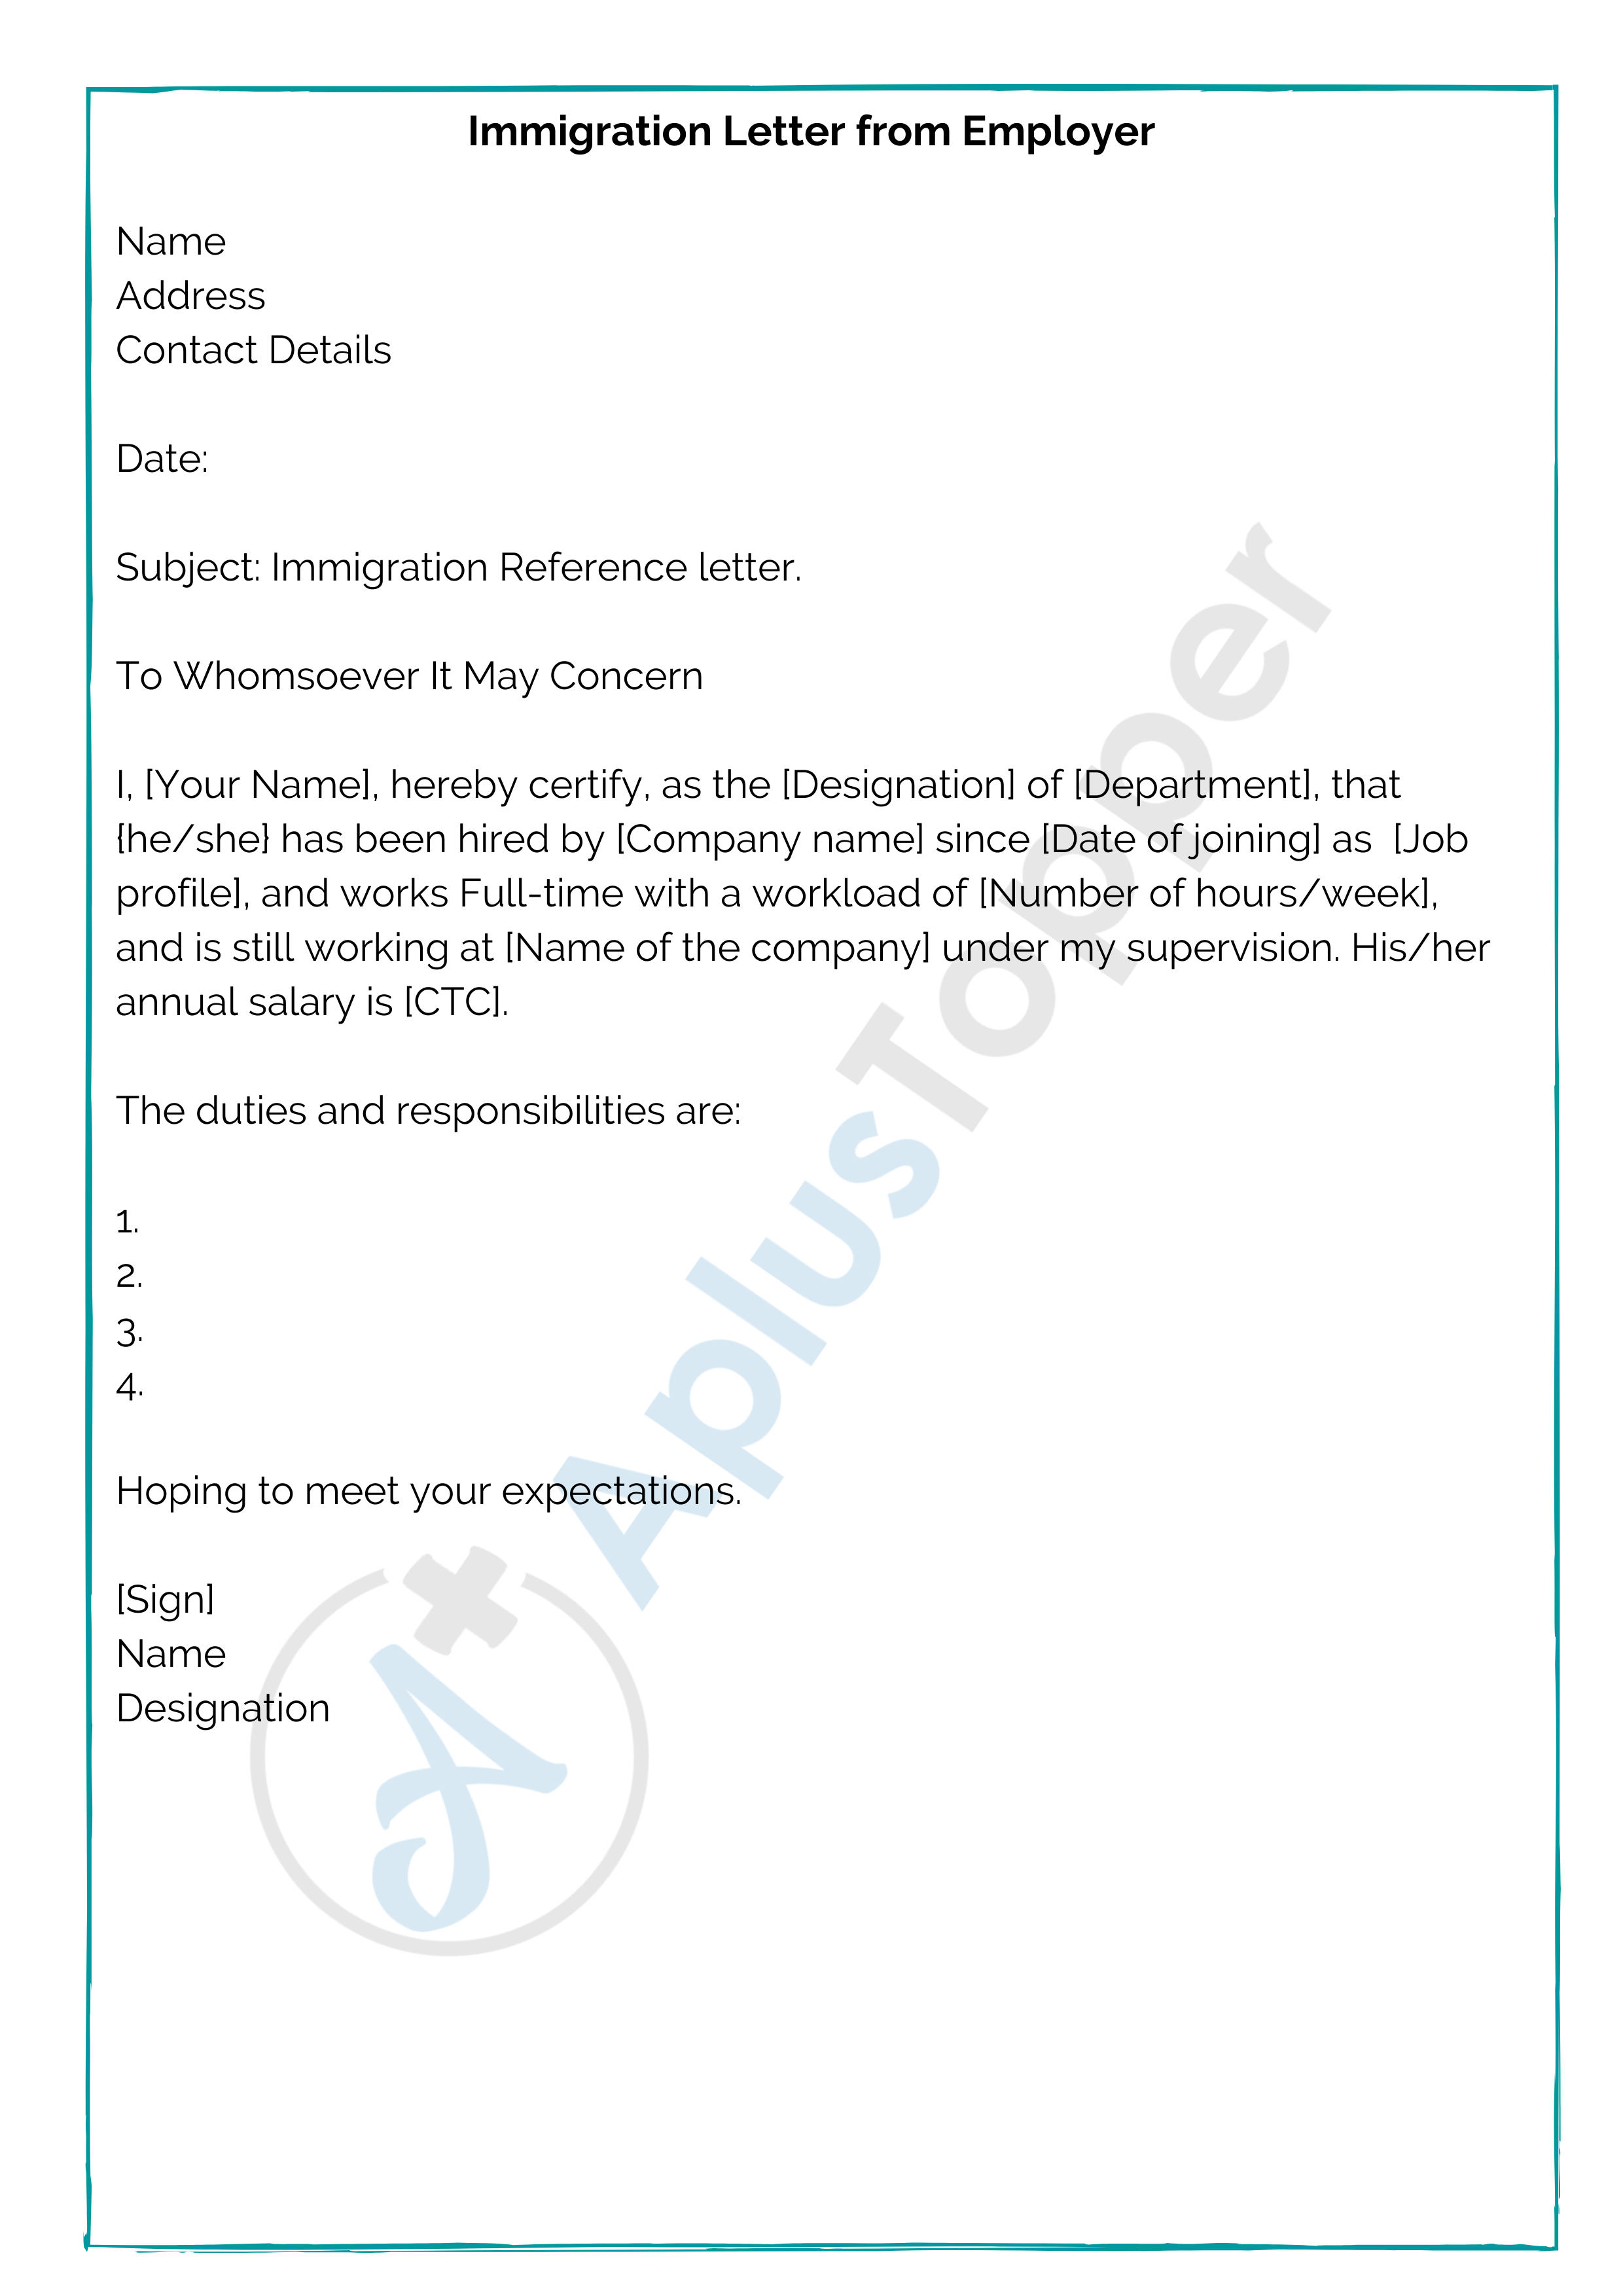 Immigration Letter Format Templates How To Write An Immigration Letter